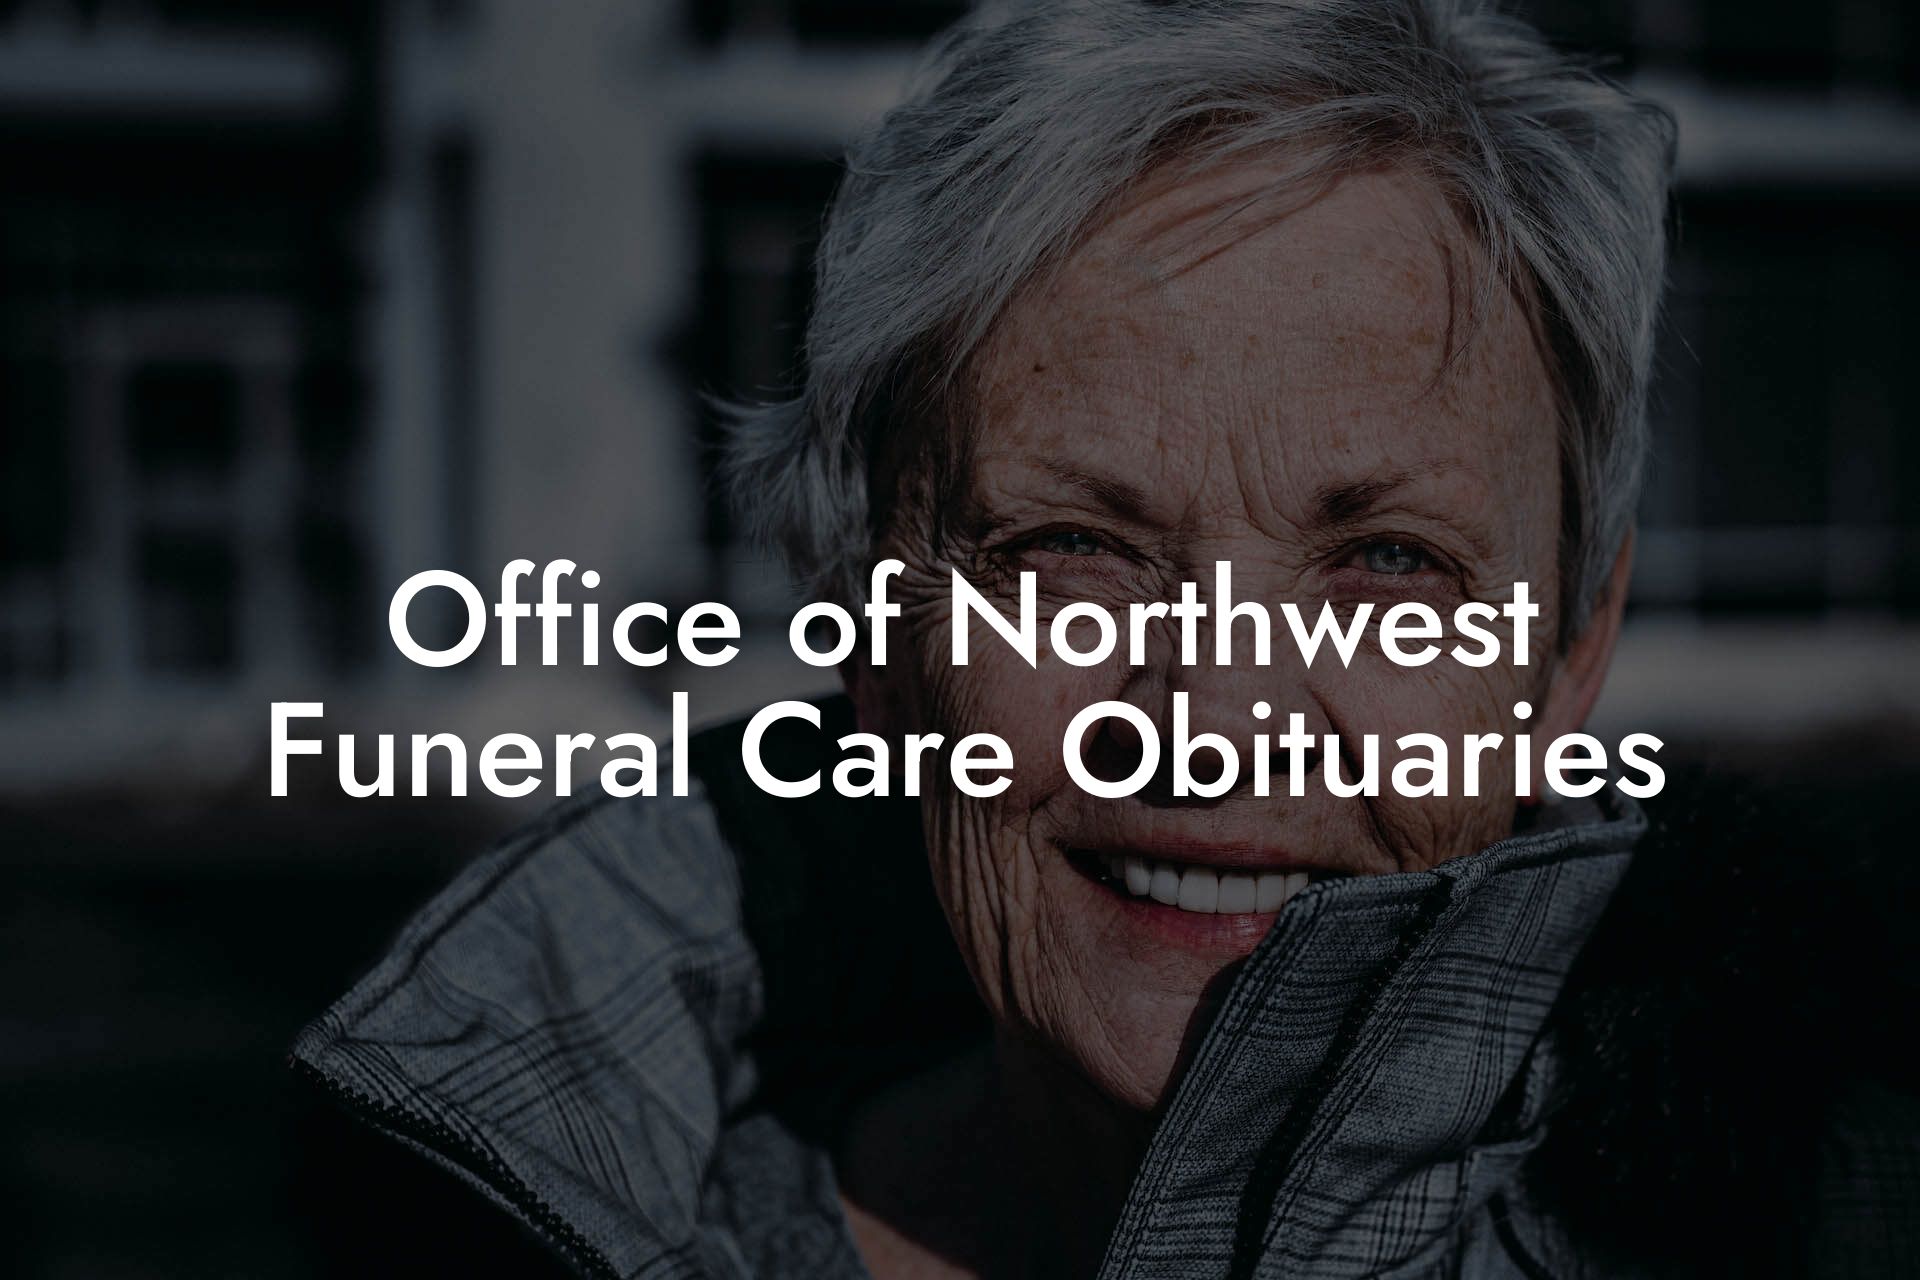 Office of Northwest Funeral Care Obituaries